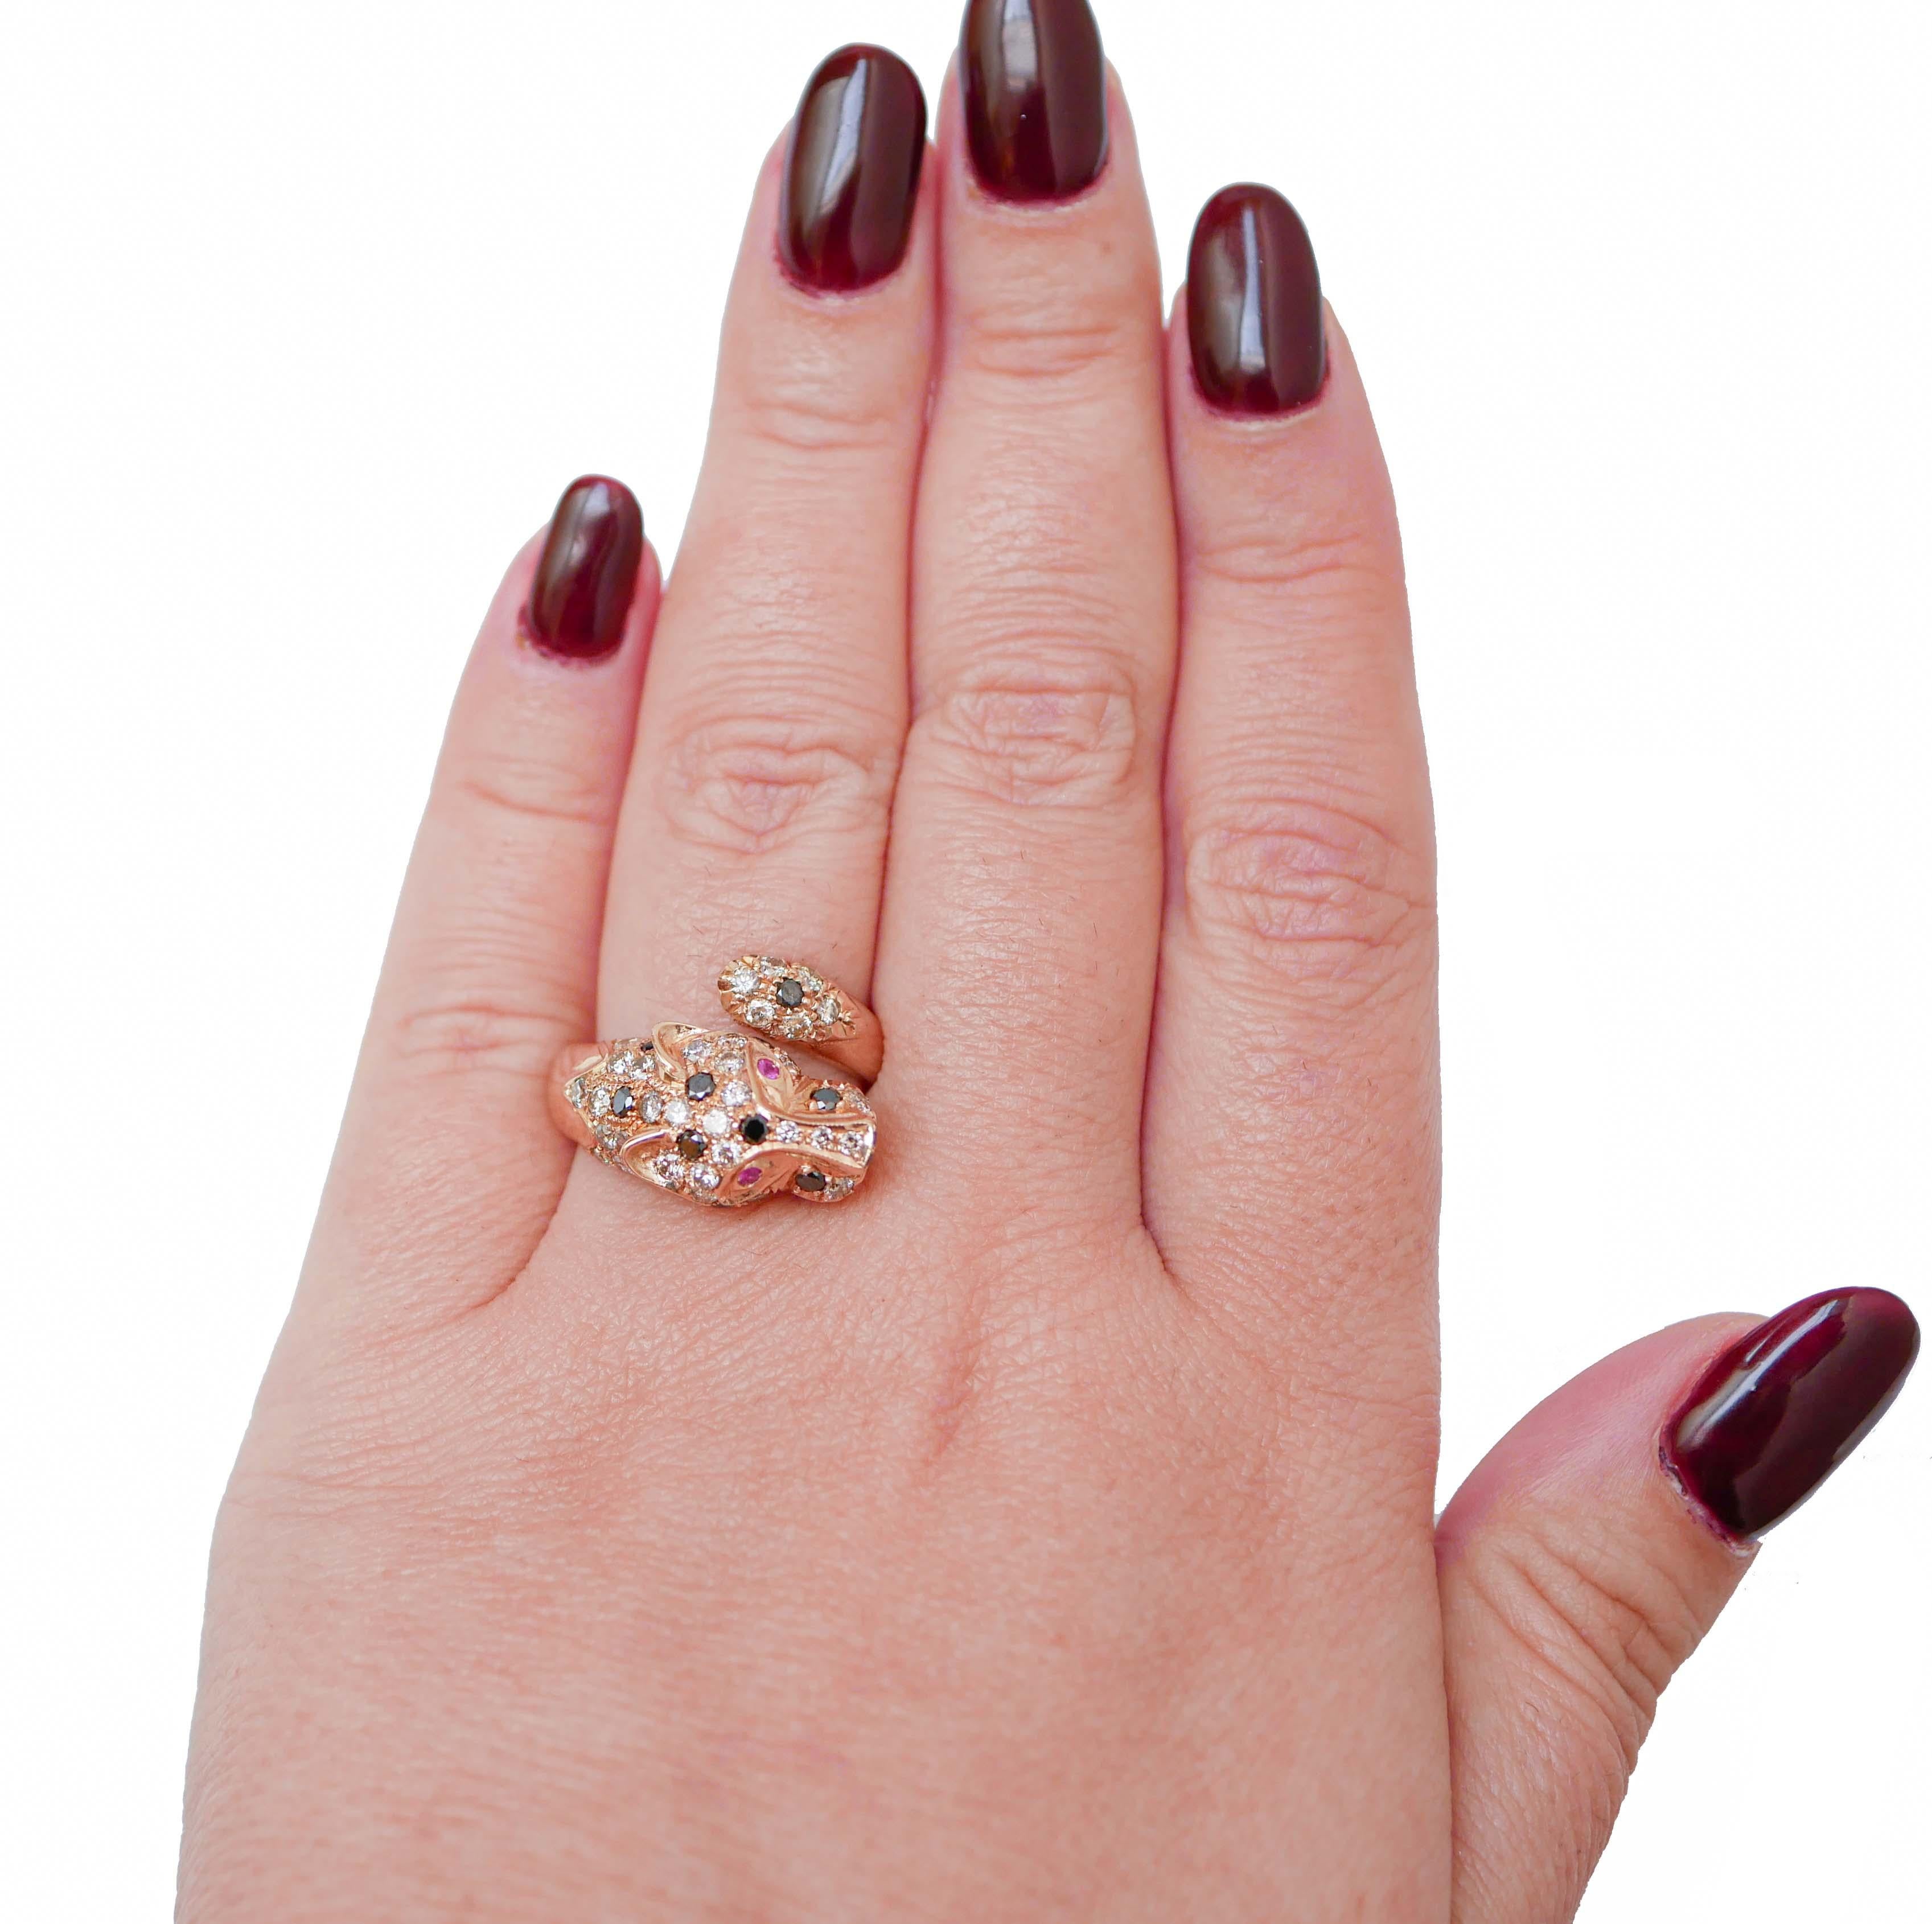 Mixed Cut Black and White Diamonds, Rubies, 14 Karat Rose Gold Panther Ring. For Sale